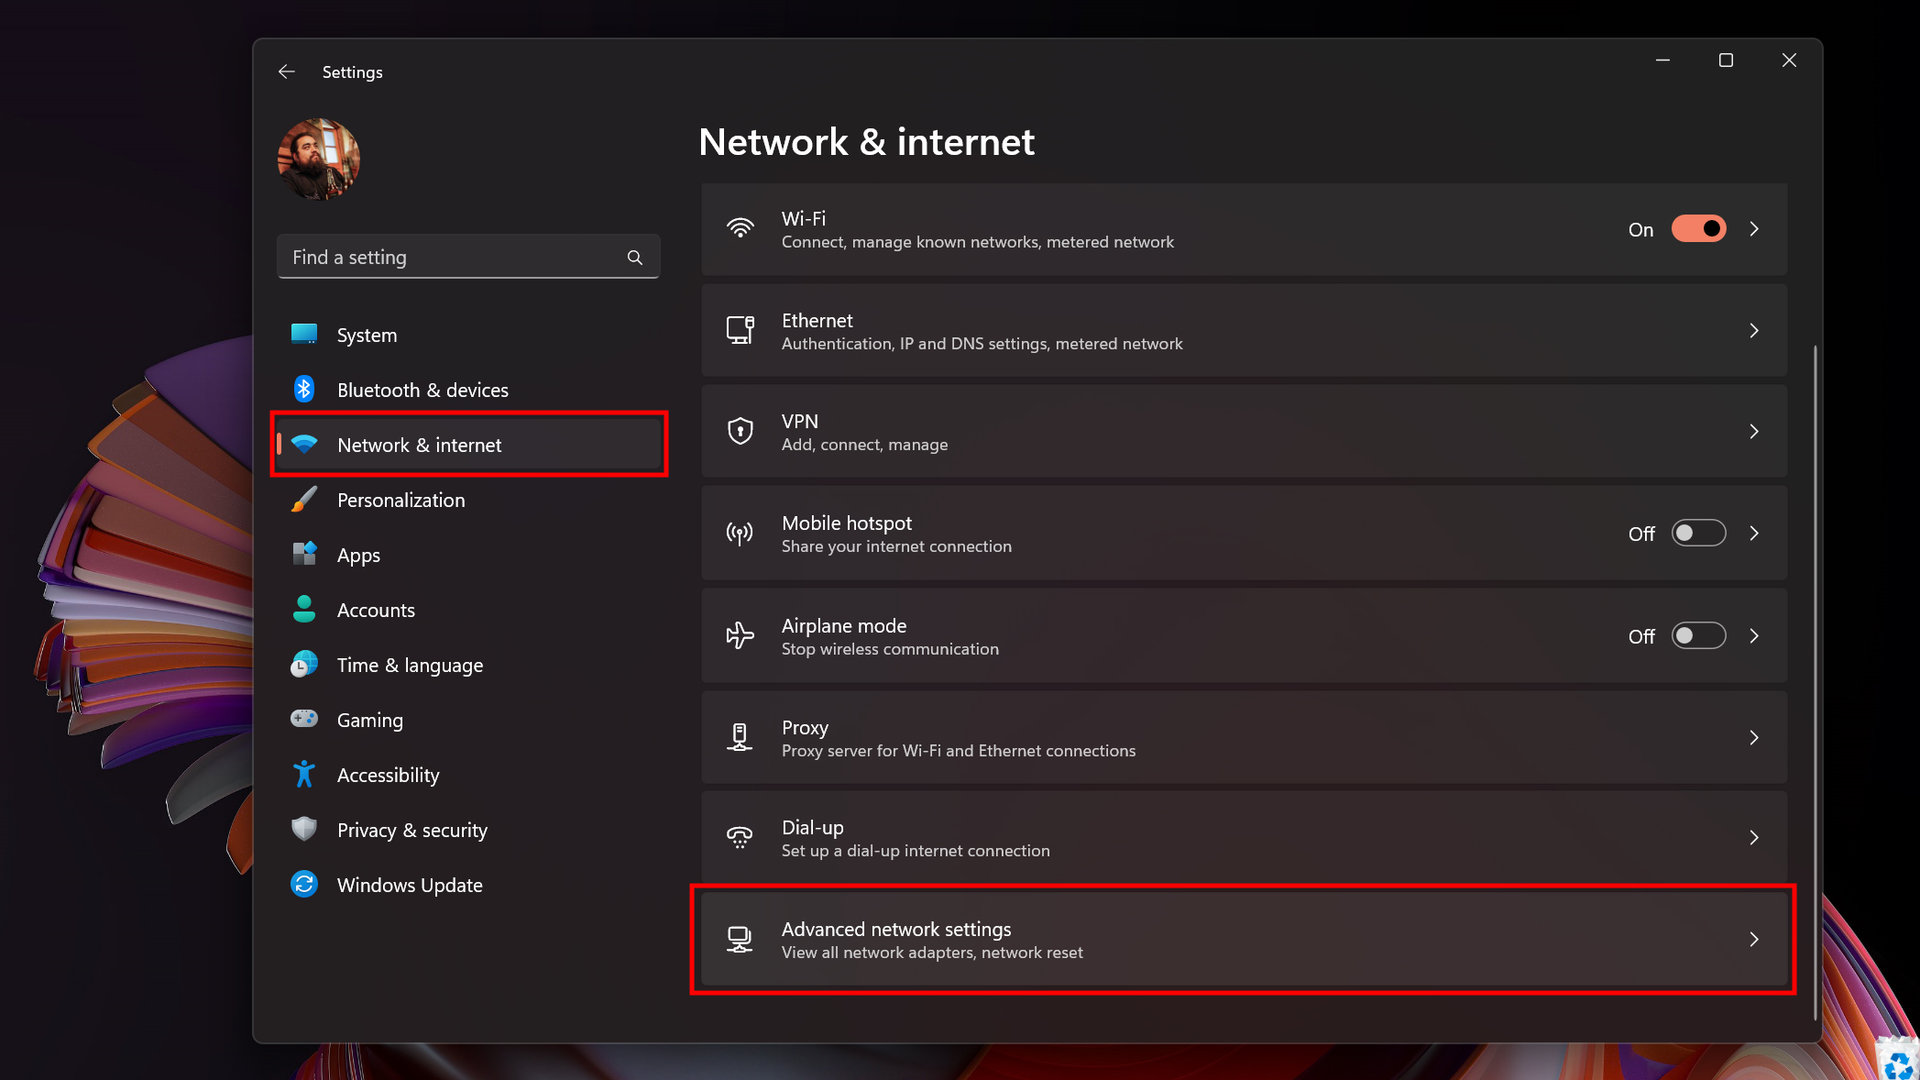 How to reset network settings on Windows 1